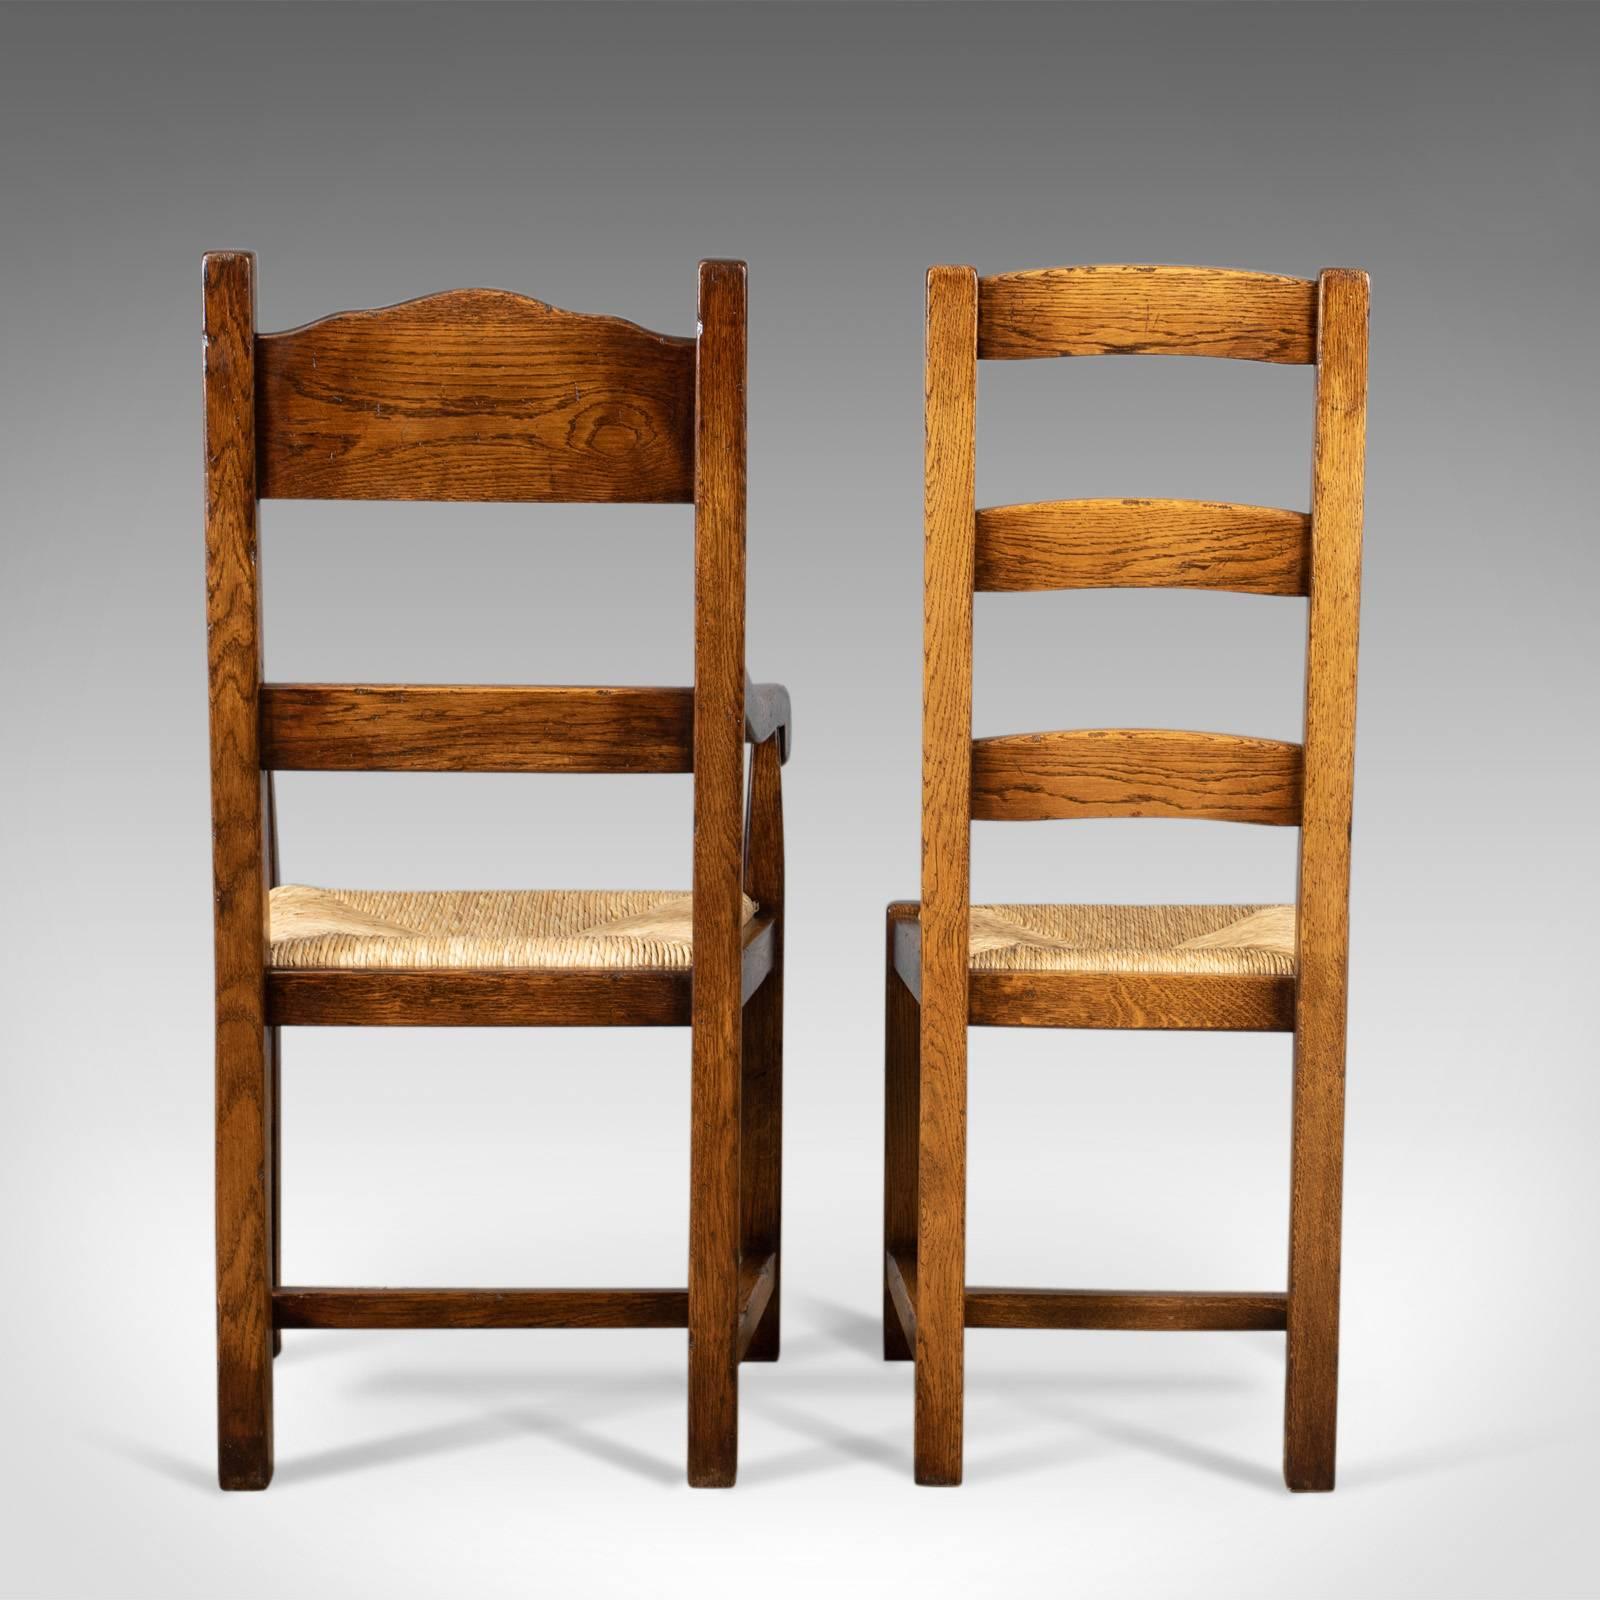 20th Century Set of Eight Dining Chairs, English Oak in Victorian Taste, Rush Seats